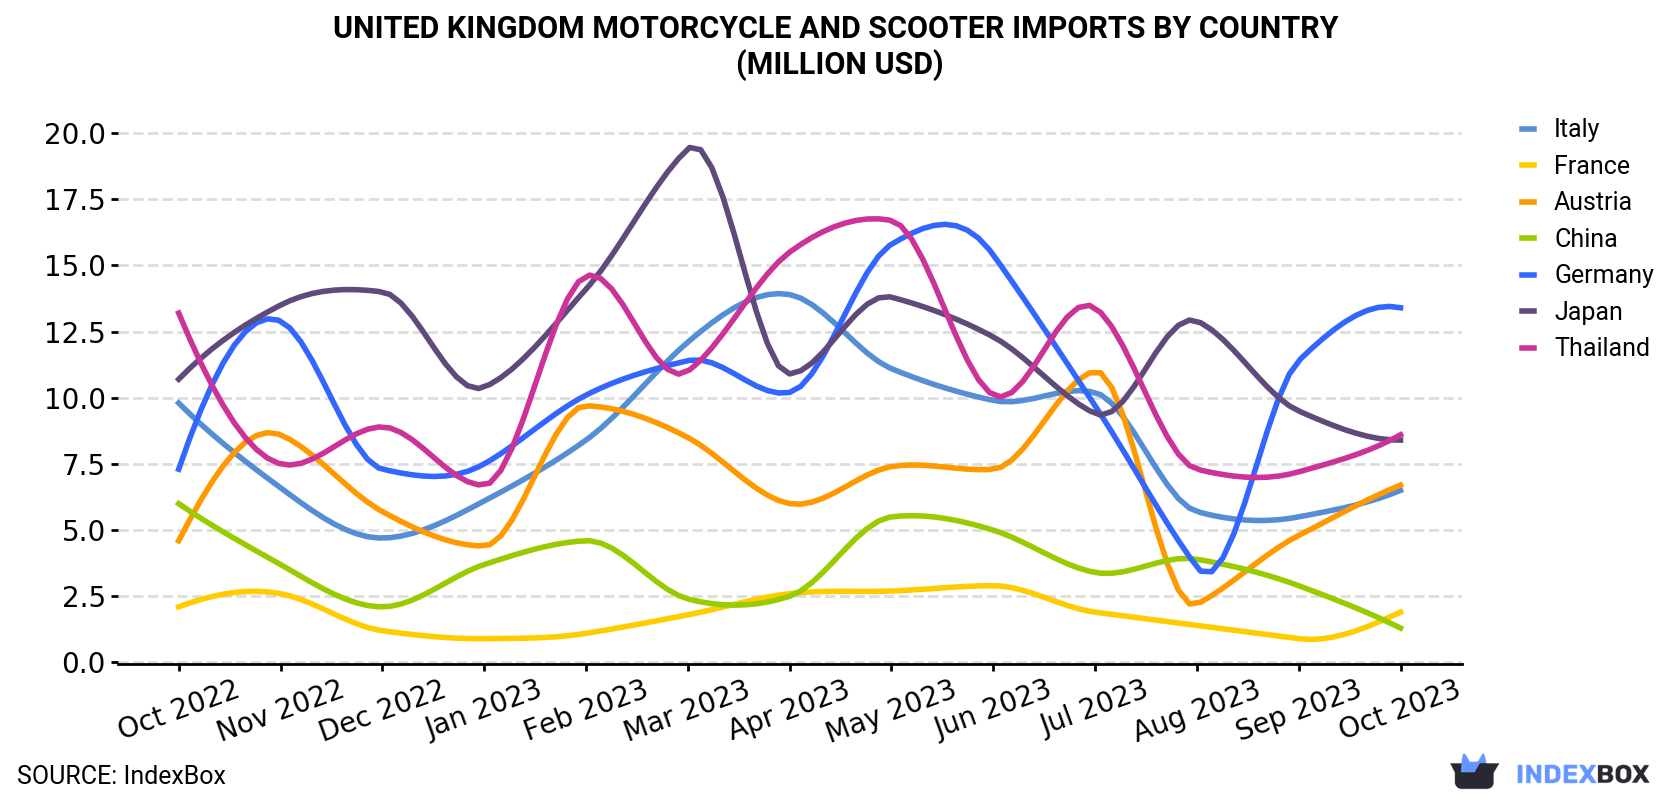 United Kingdom Motorcycle and Scooter Imports By Country (Million USD)